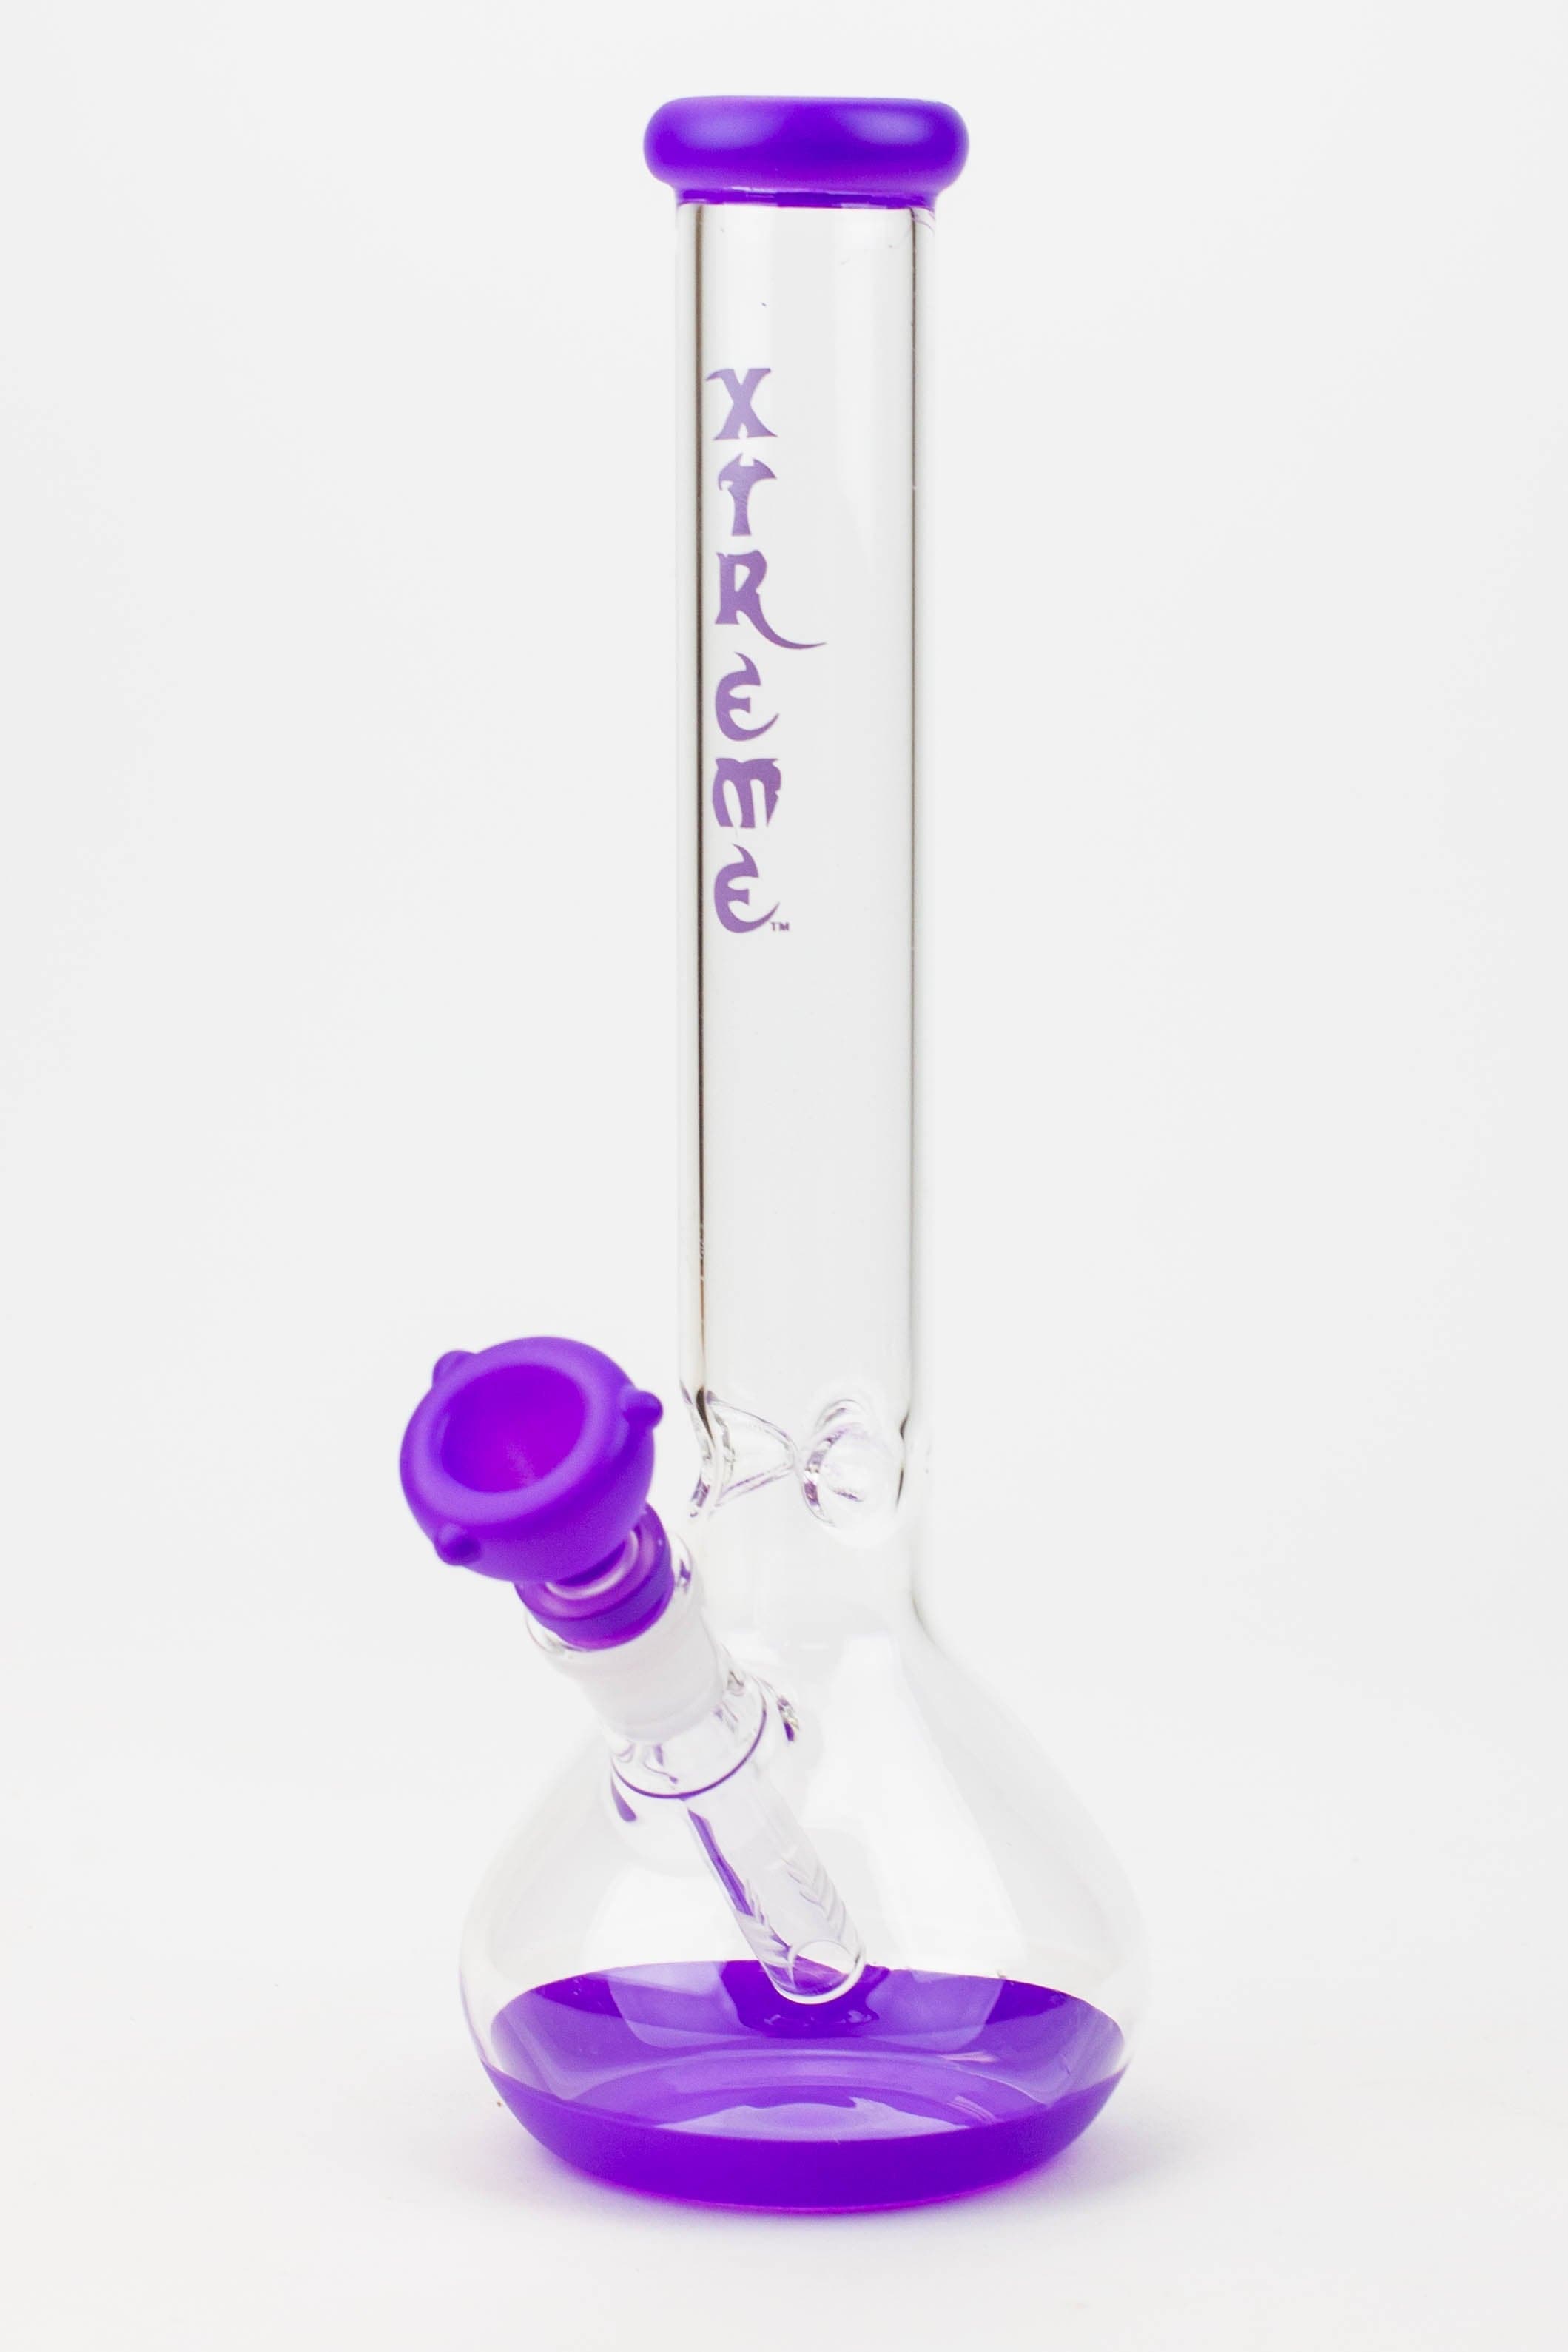 Xtreme round base glass water pipes_10